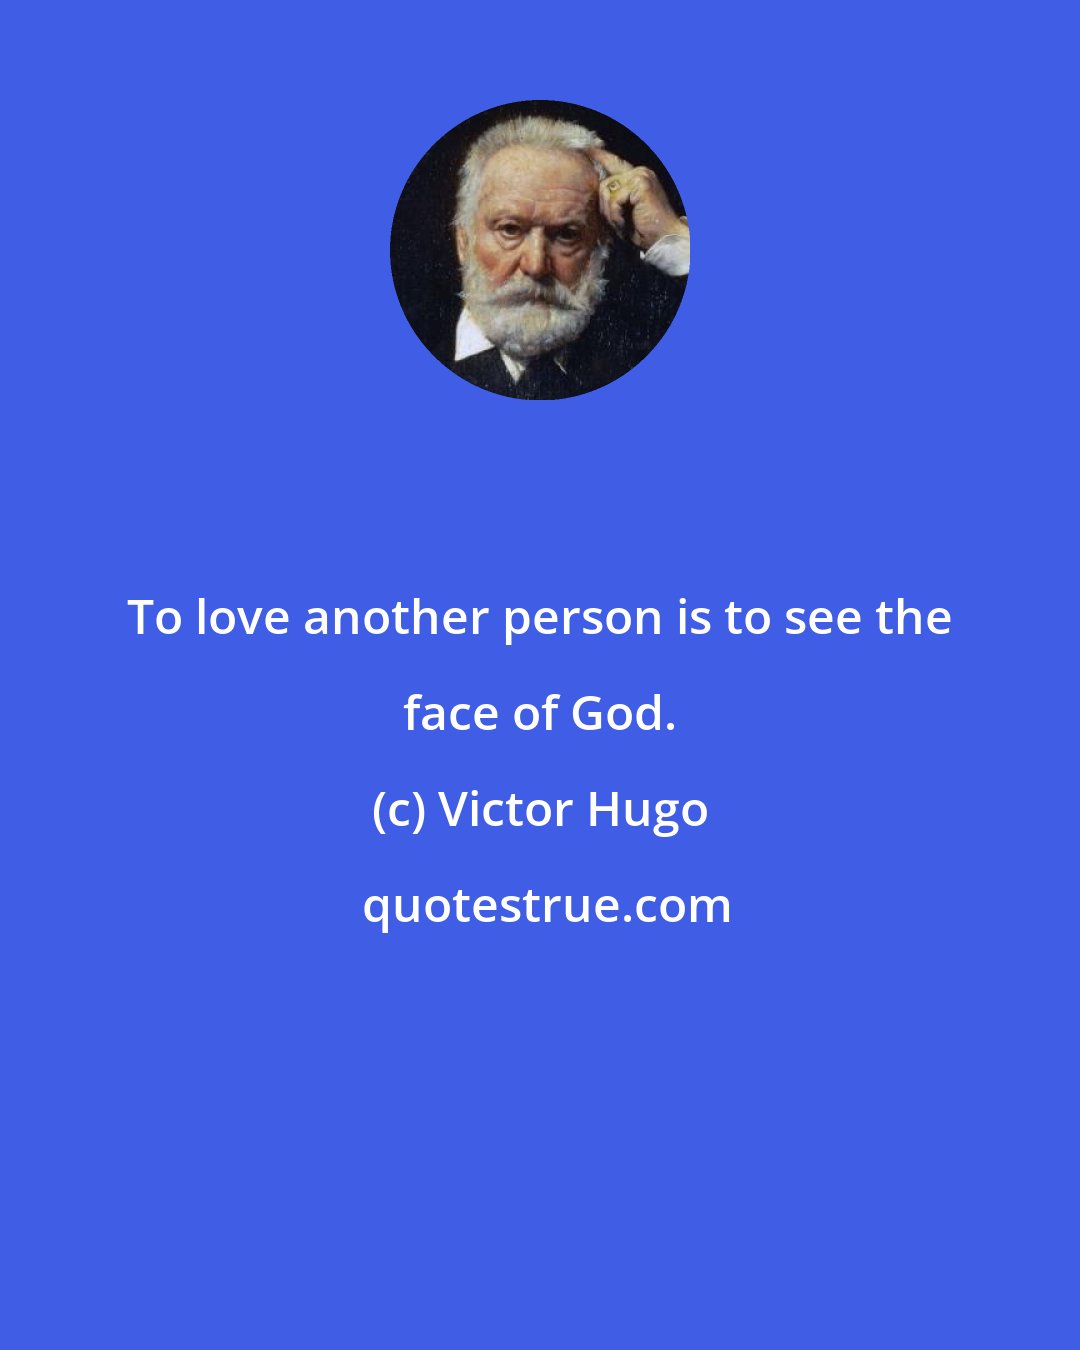 Victor Hugo: To love another person is to see the face of God.